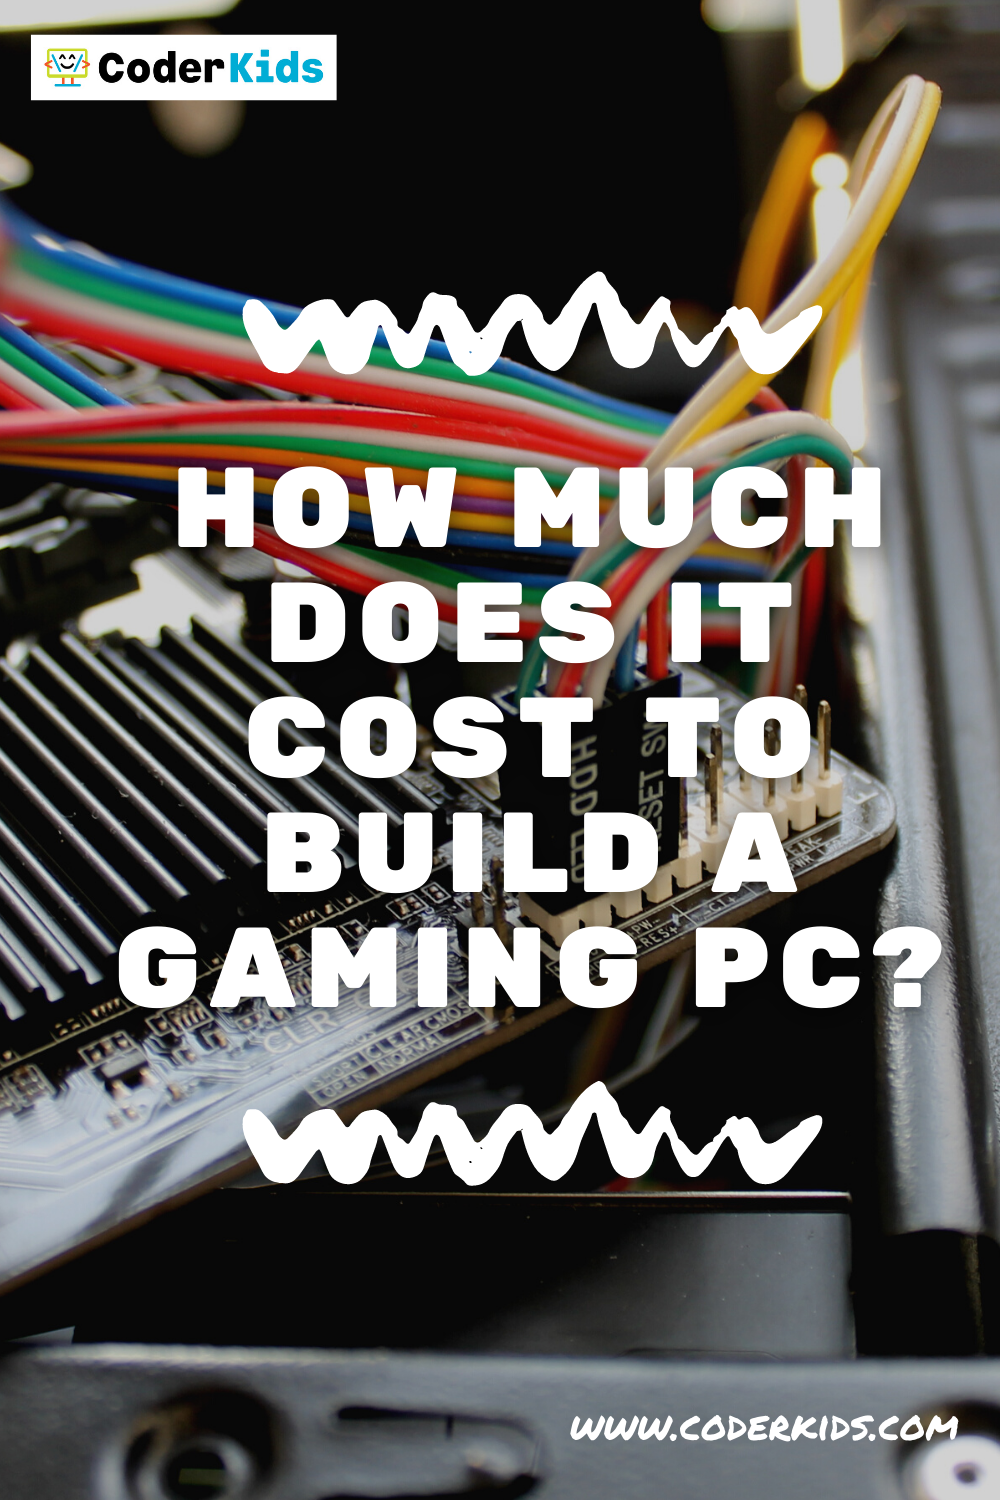 How Much Does it Cost to Build a Gaming PC? | Coder Kids